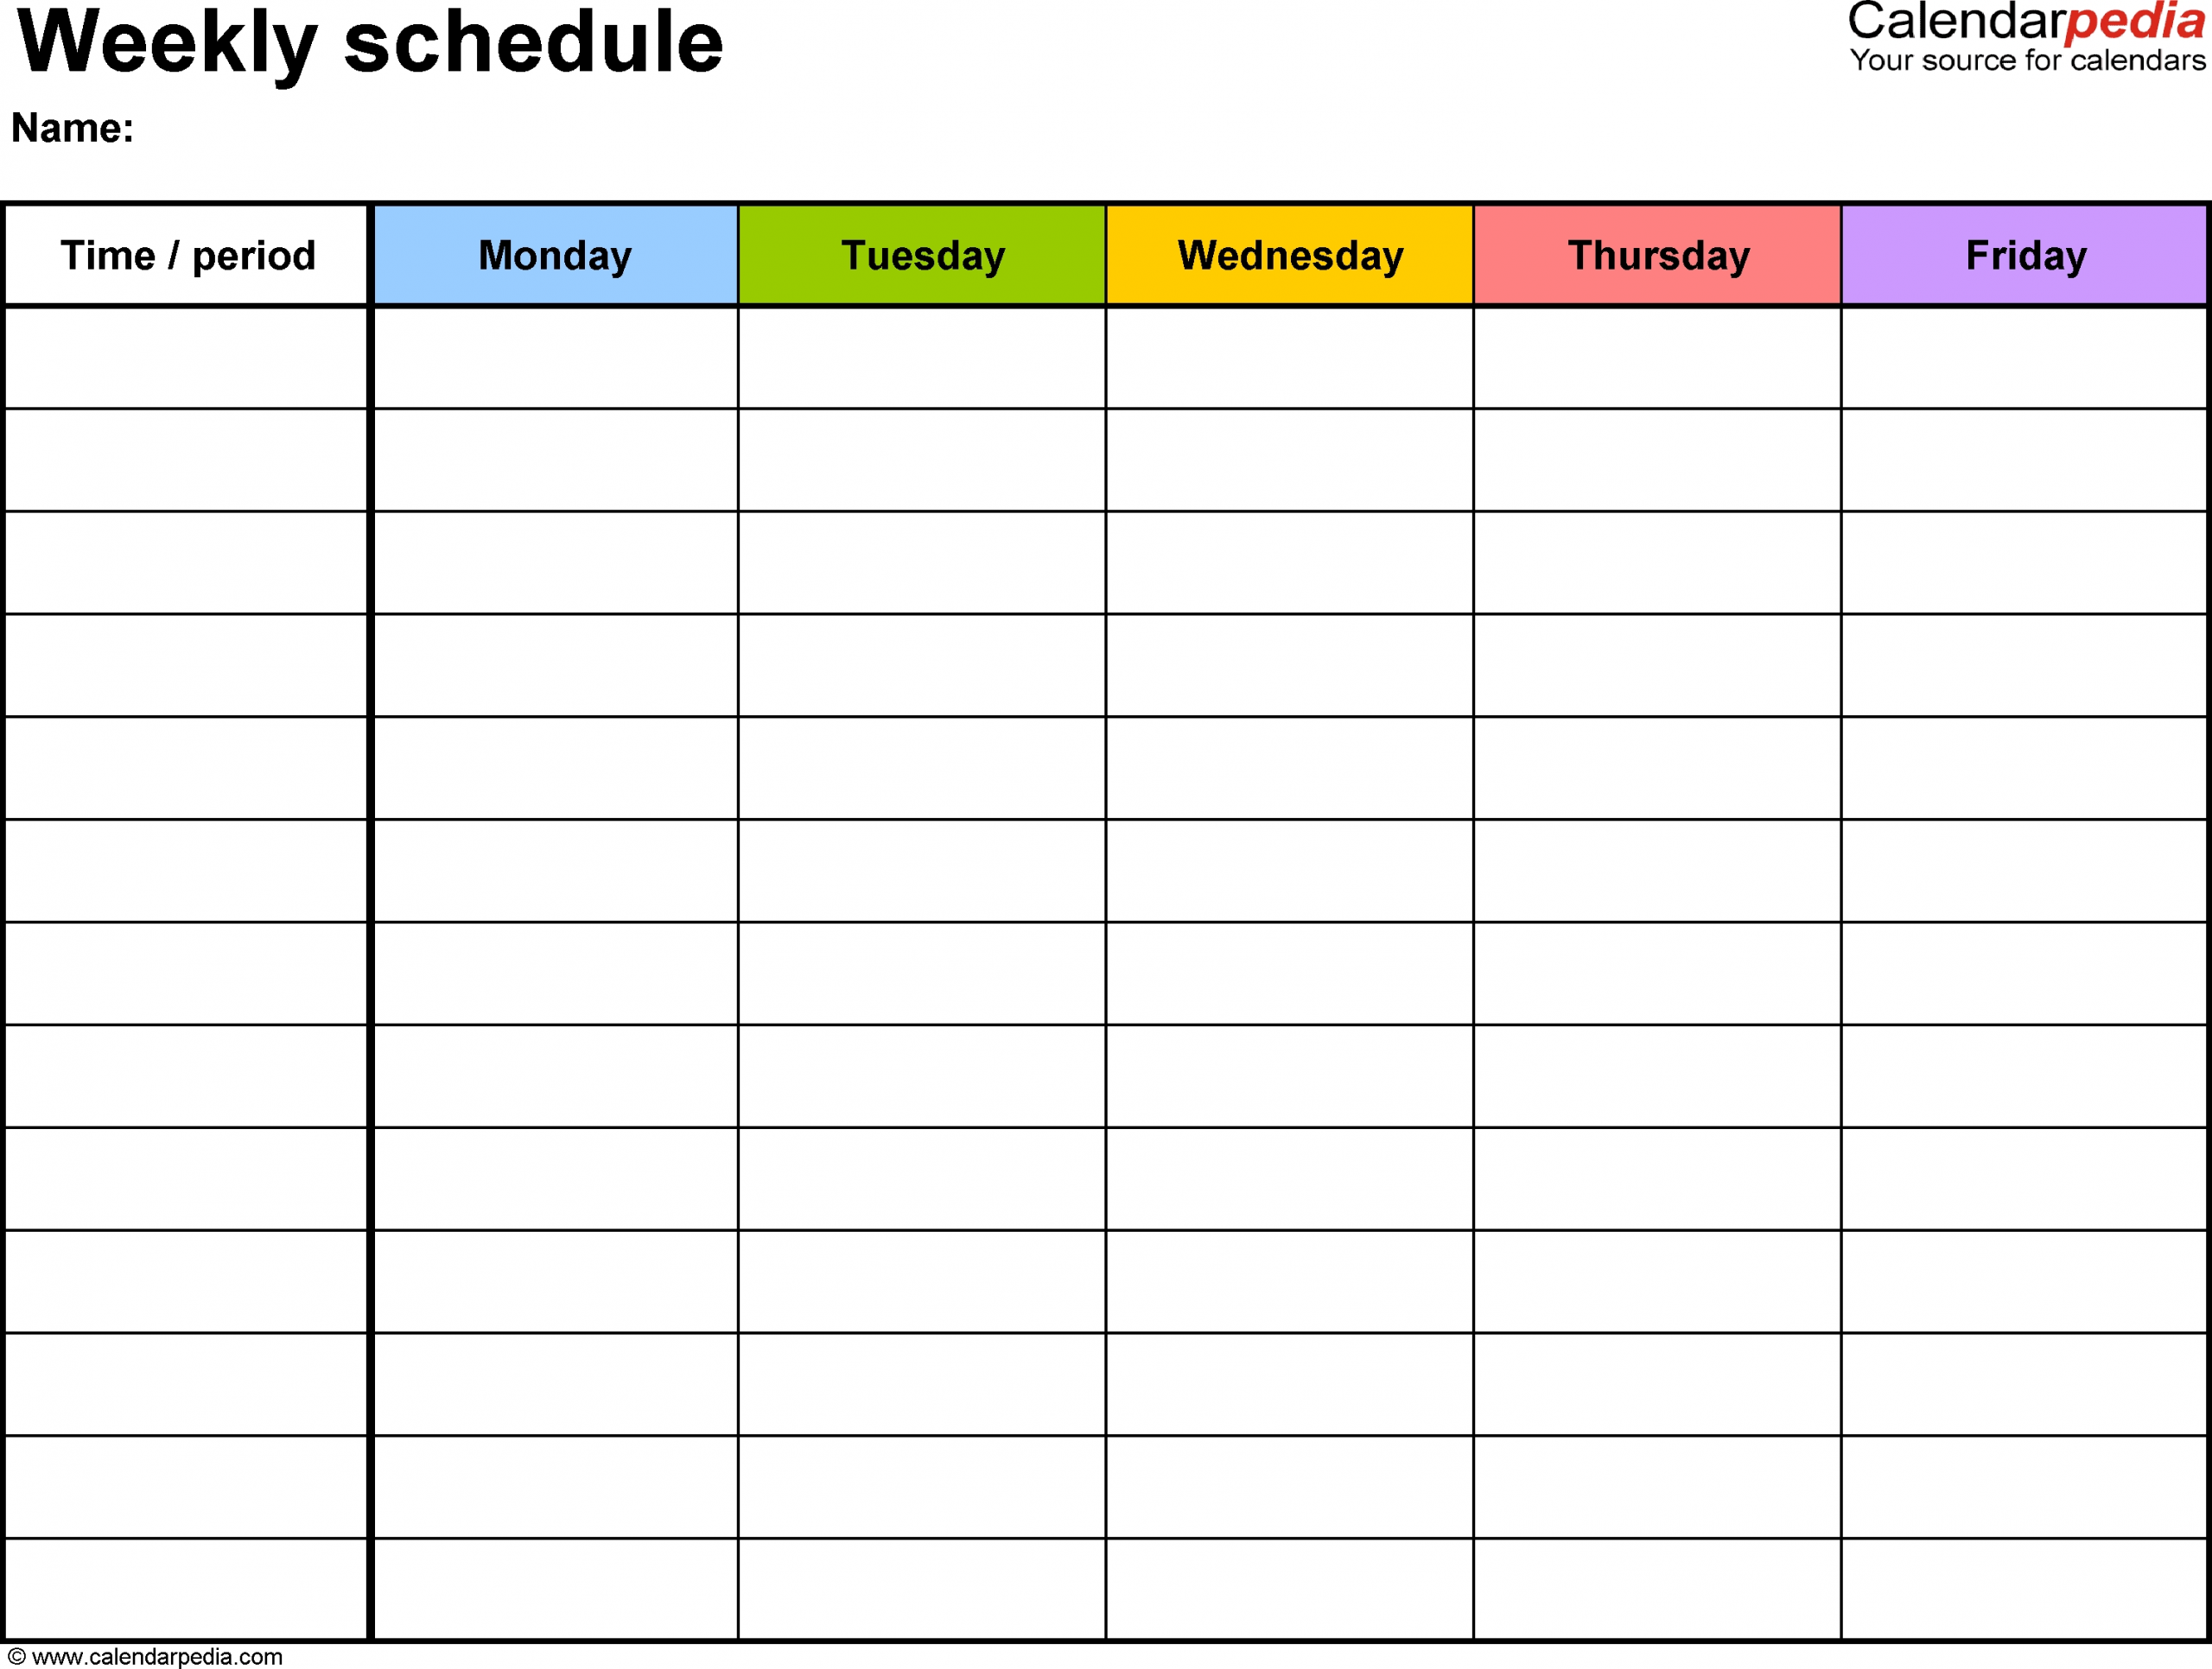 Free Weekly Schedule Templates For Word - 18 Templates inside 5 Day Calendar Template Word